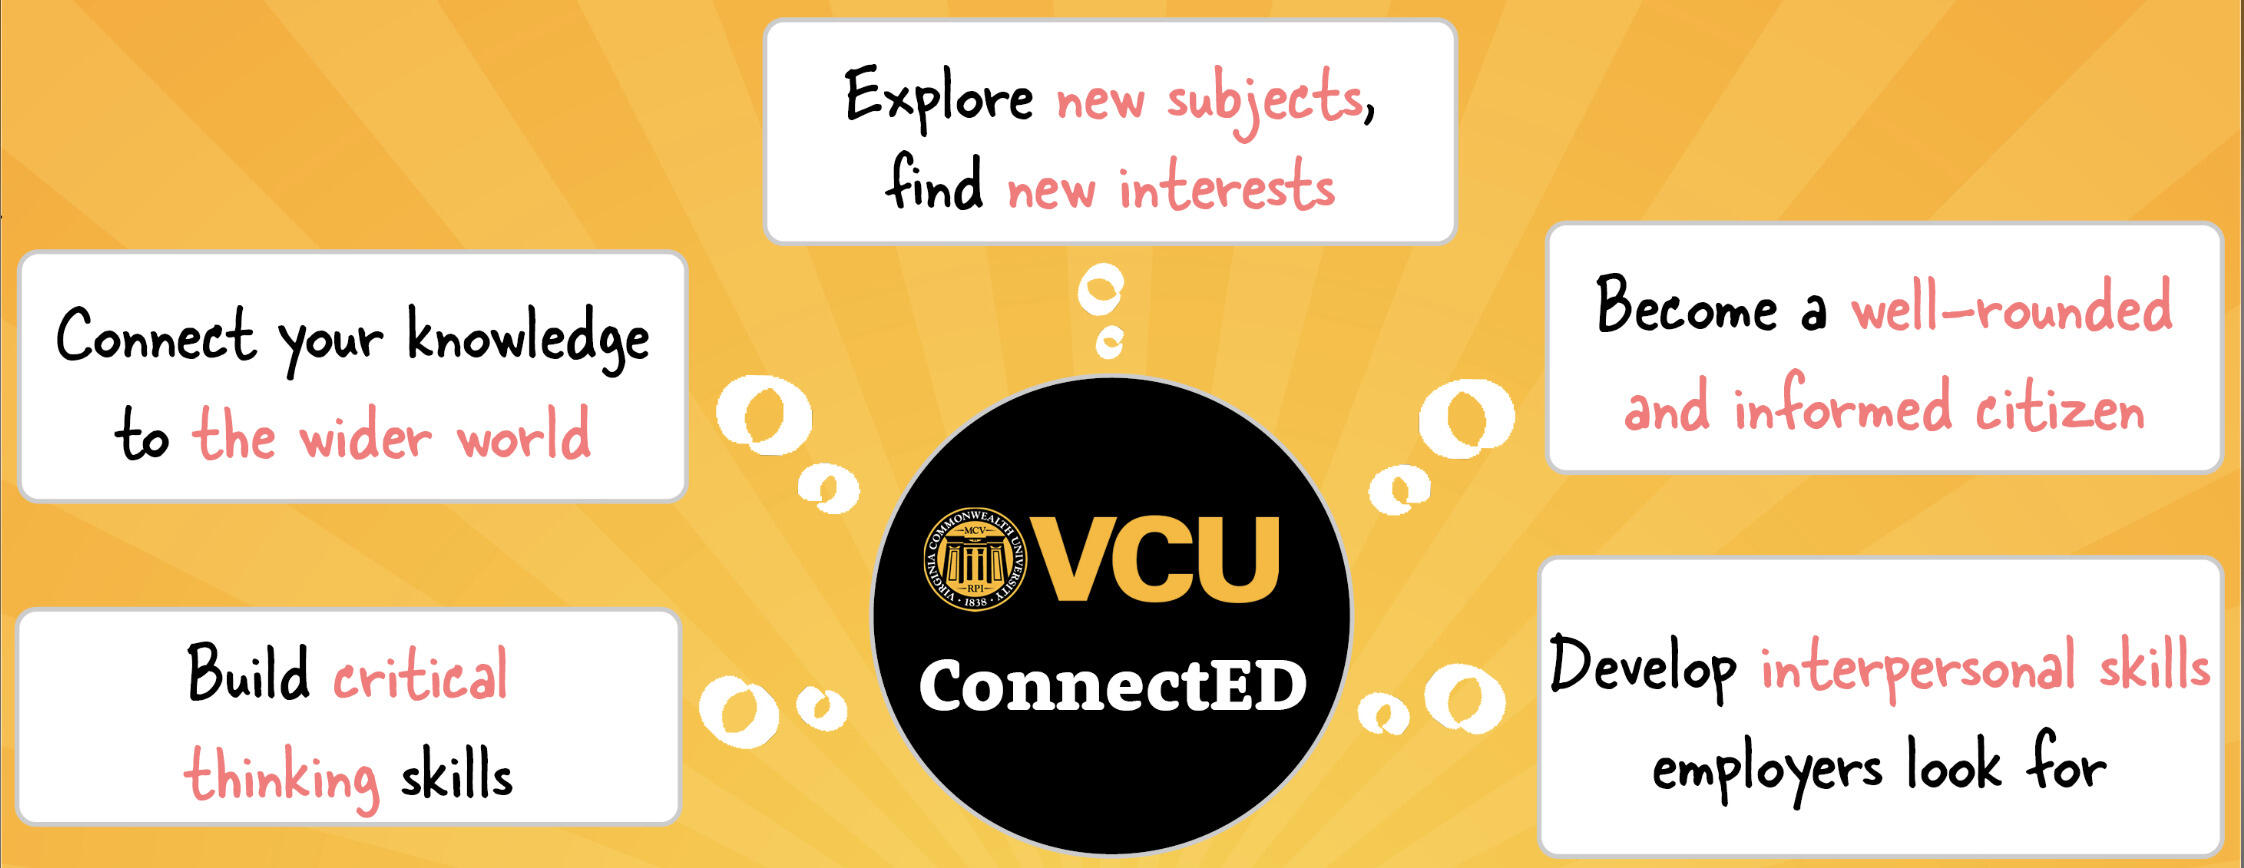 A circle in the center that says \"VCU ConnectED.\" Around it are five thought bubbles. The bubble in the bottom left corner says \"Build critical thinking skills.\" The bubble in the upper left says \"Connect your knowledge to the wider world.\" The bubble at the top of the image says \"Explore new subjects, find new interests.\" The upper right bubble says \"Become a well-rounded and informed citizen.\" The bottom right bubble says \"Develop interpersonal skills employers look for.\"